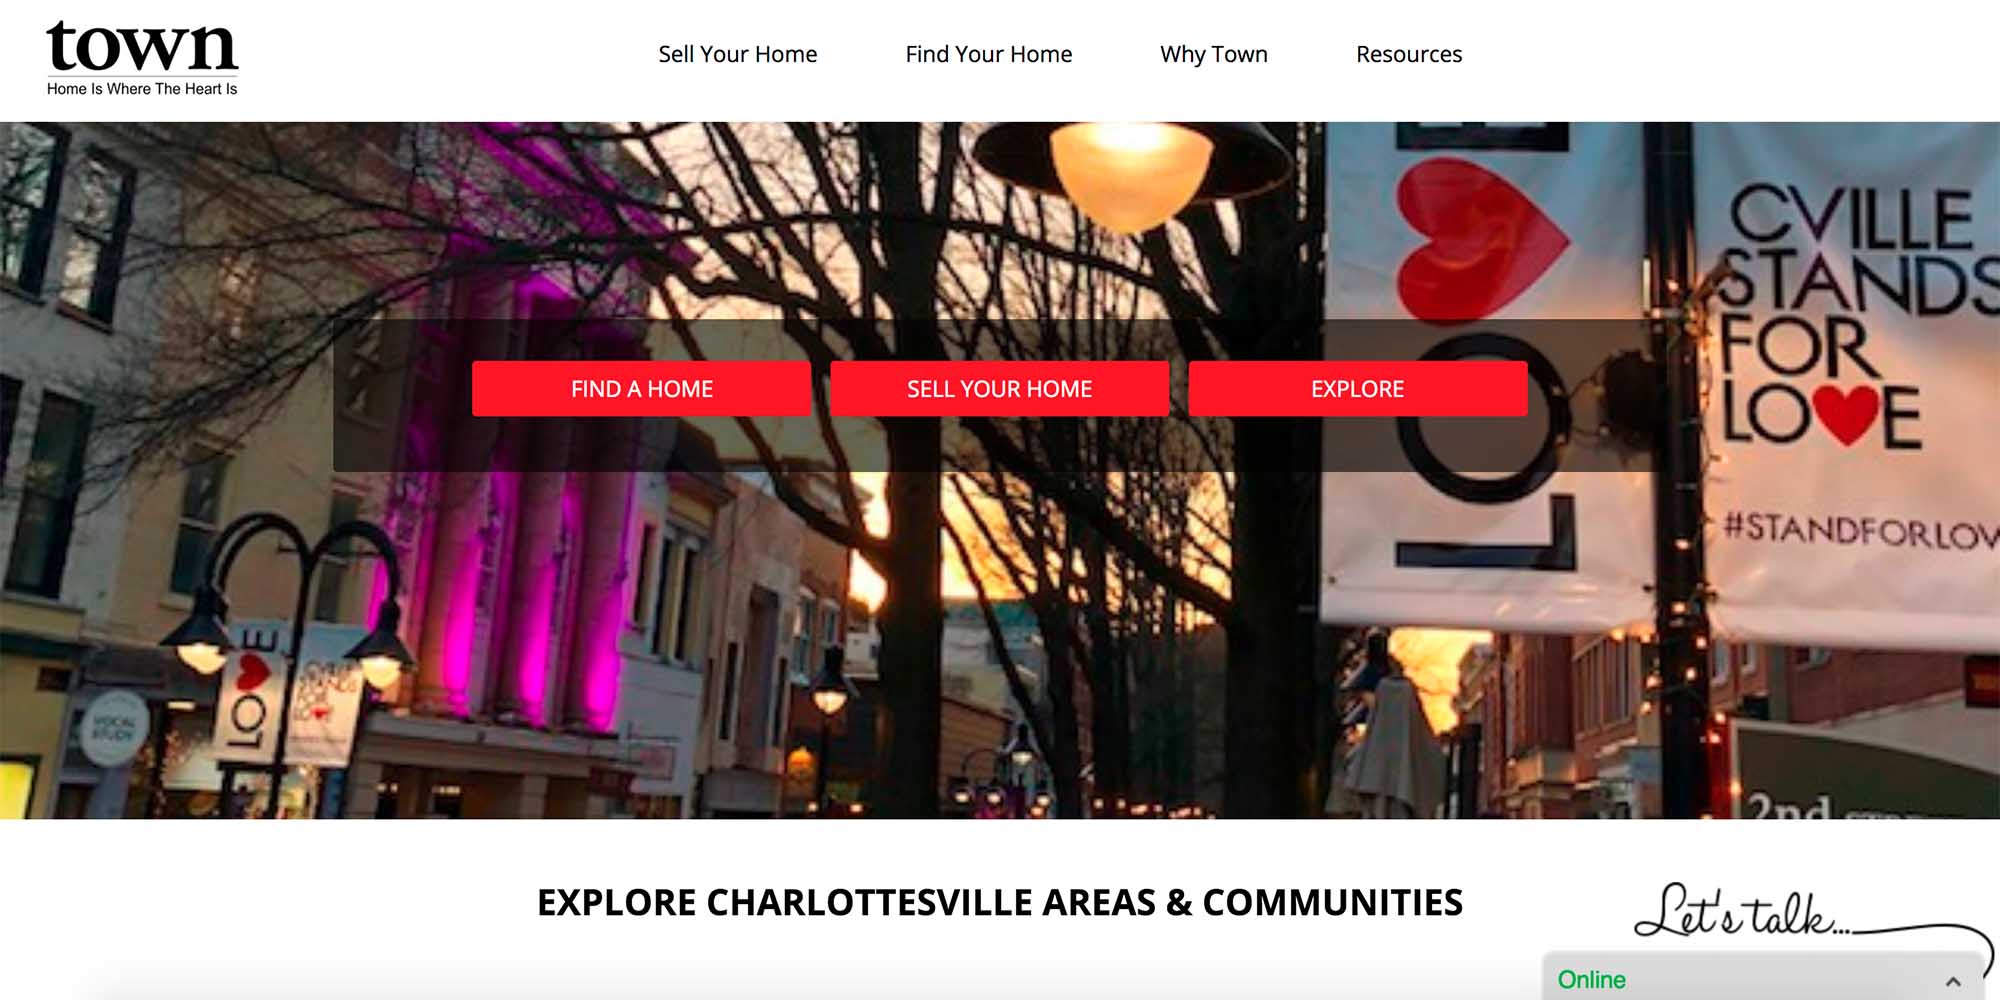  Incredible!  Looking for the best real estate websites? Here are 101 of them.  We reviewed each site and ranked them 1-101.  Here's towncville.com.  Want to see who made the cut? 